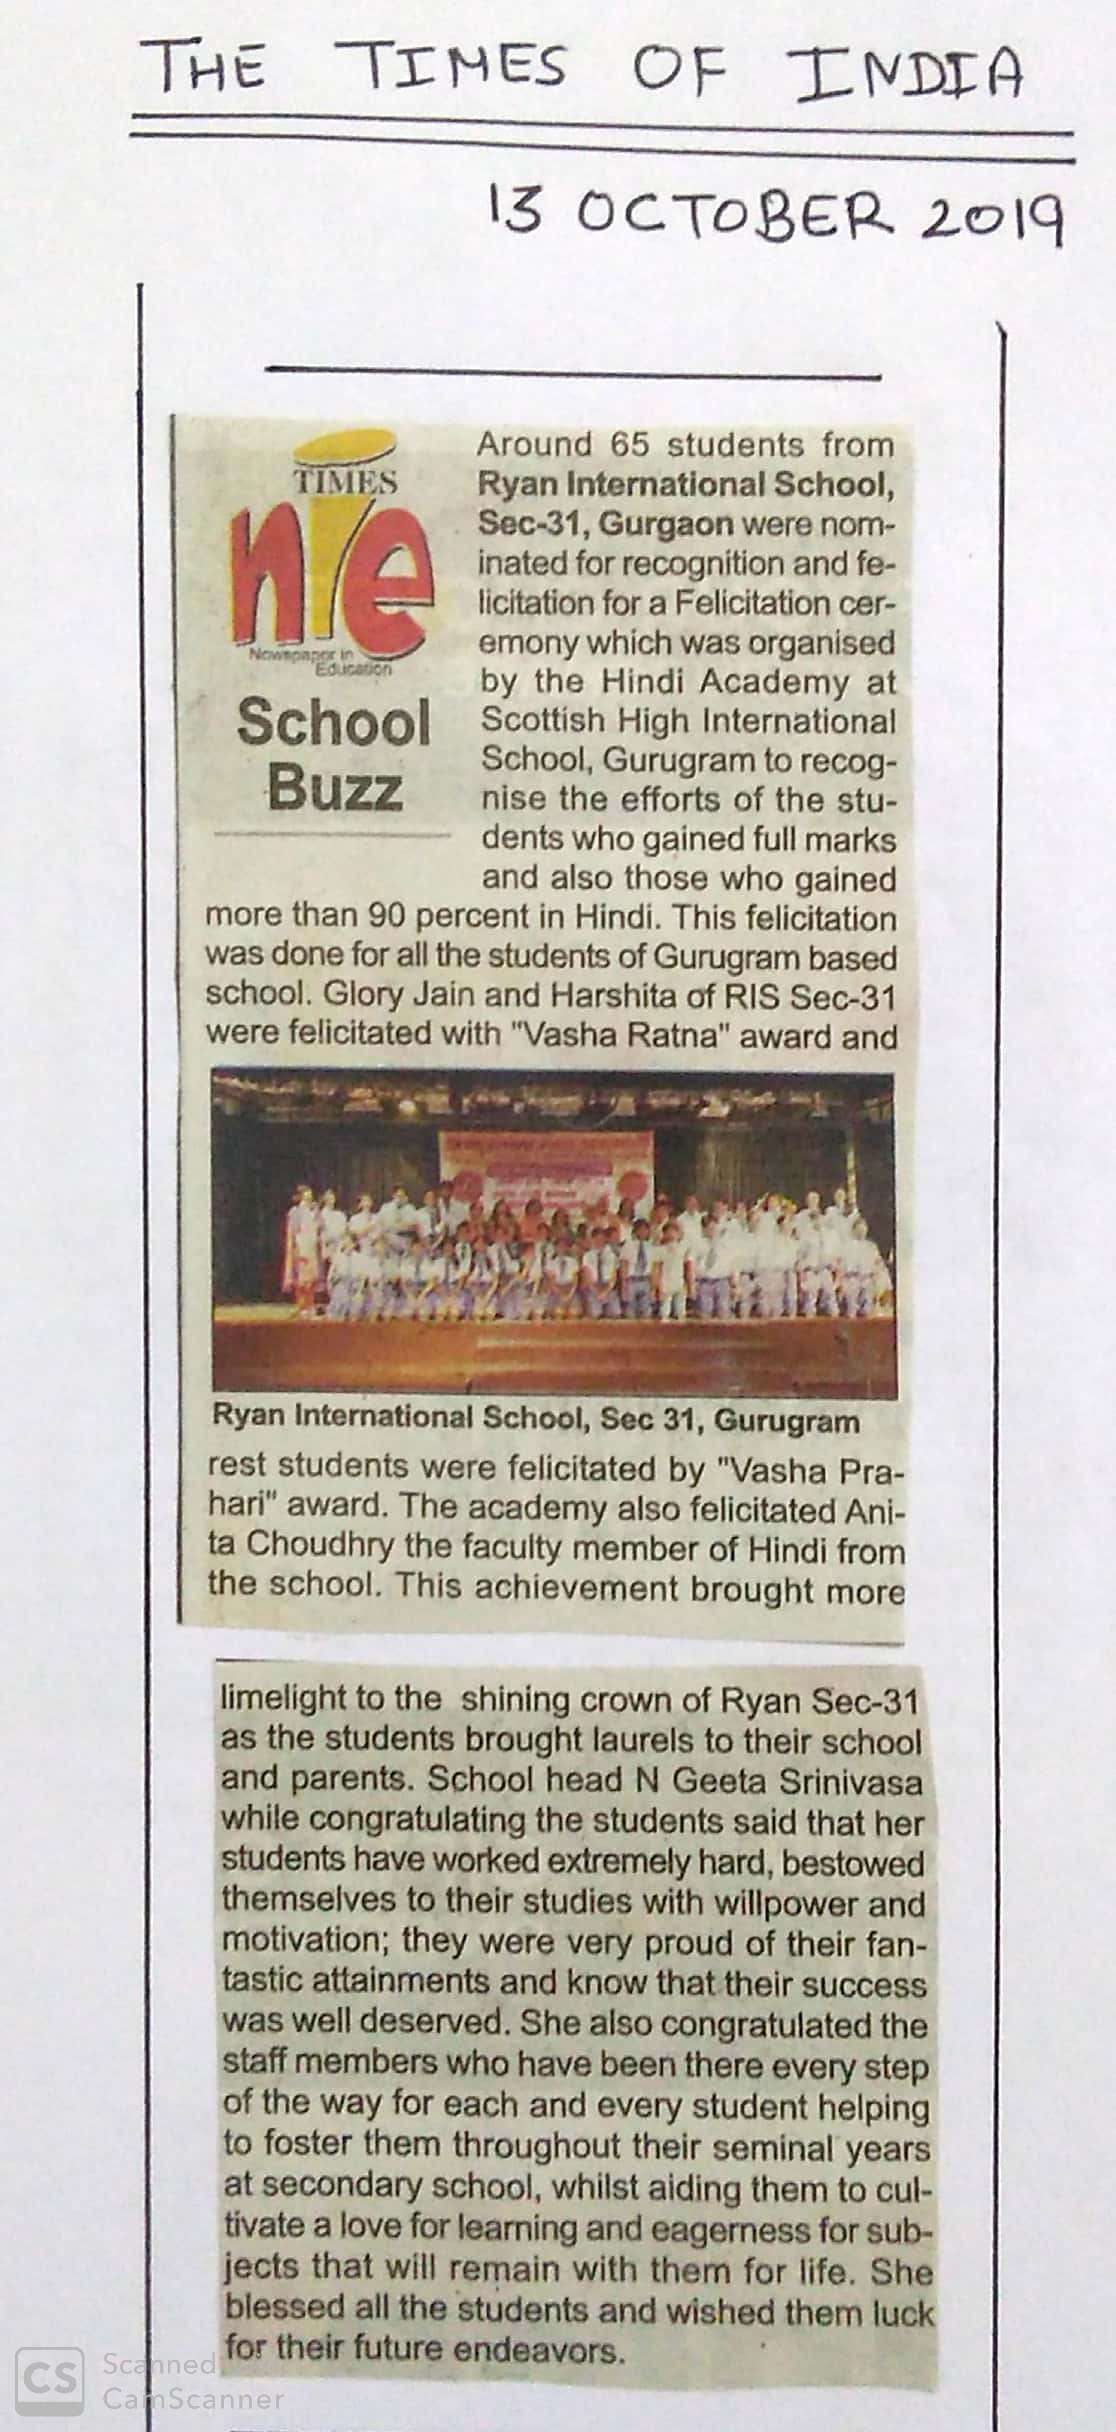 Around 65 students of Ryan International School Gurgaon Sector 31 were for a Felicitation ceremony to recognise efforts of students to scored full marks in Hindi - Ryan International School, Sec 31 Gurgaon - Ryan Group